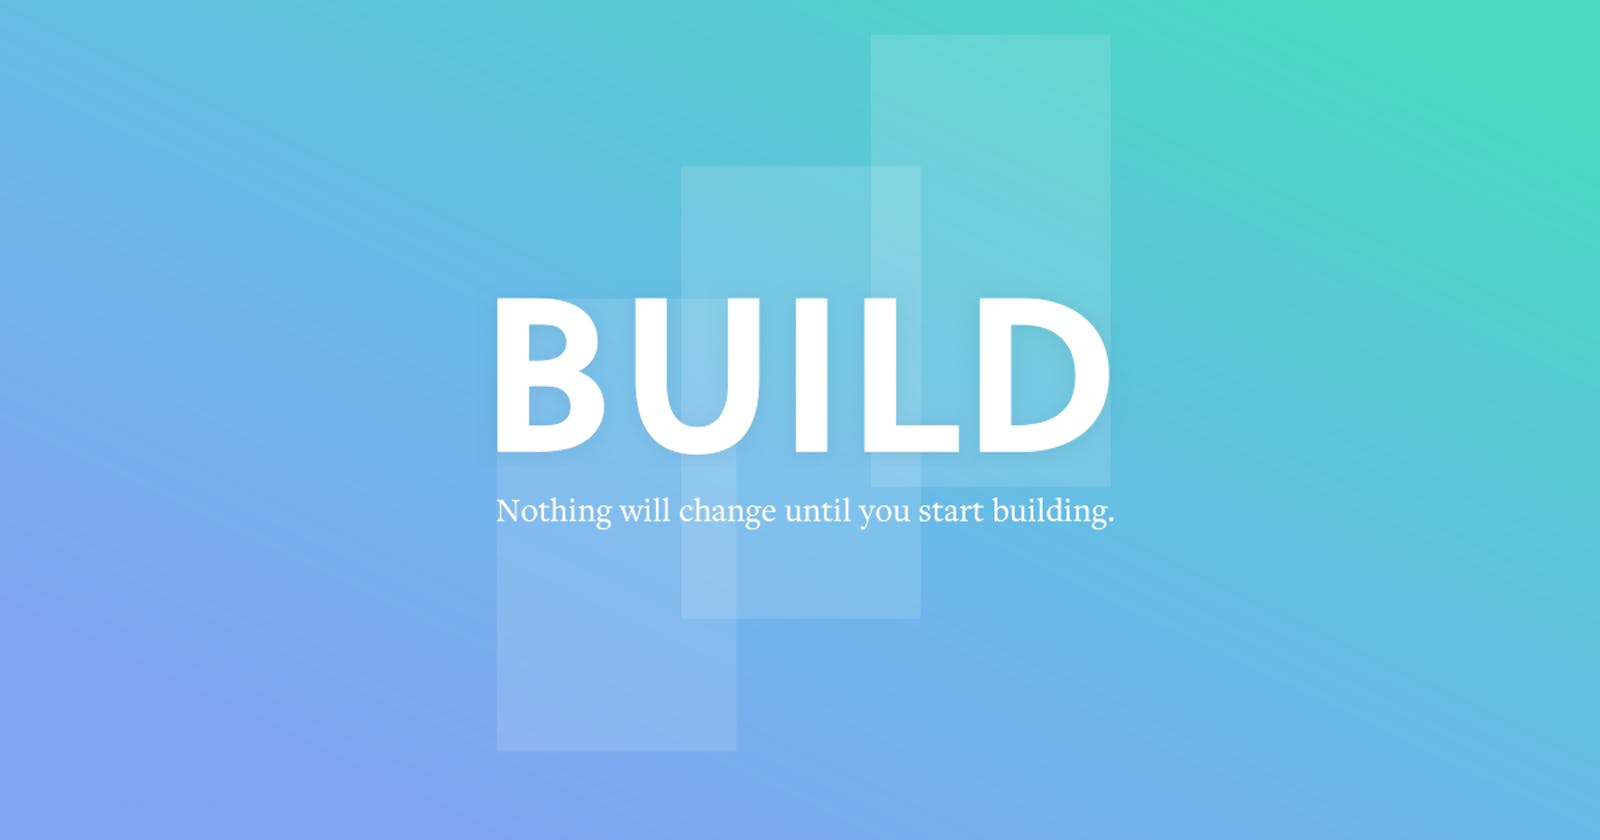 Nothing will change until you start building.